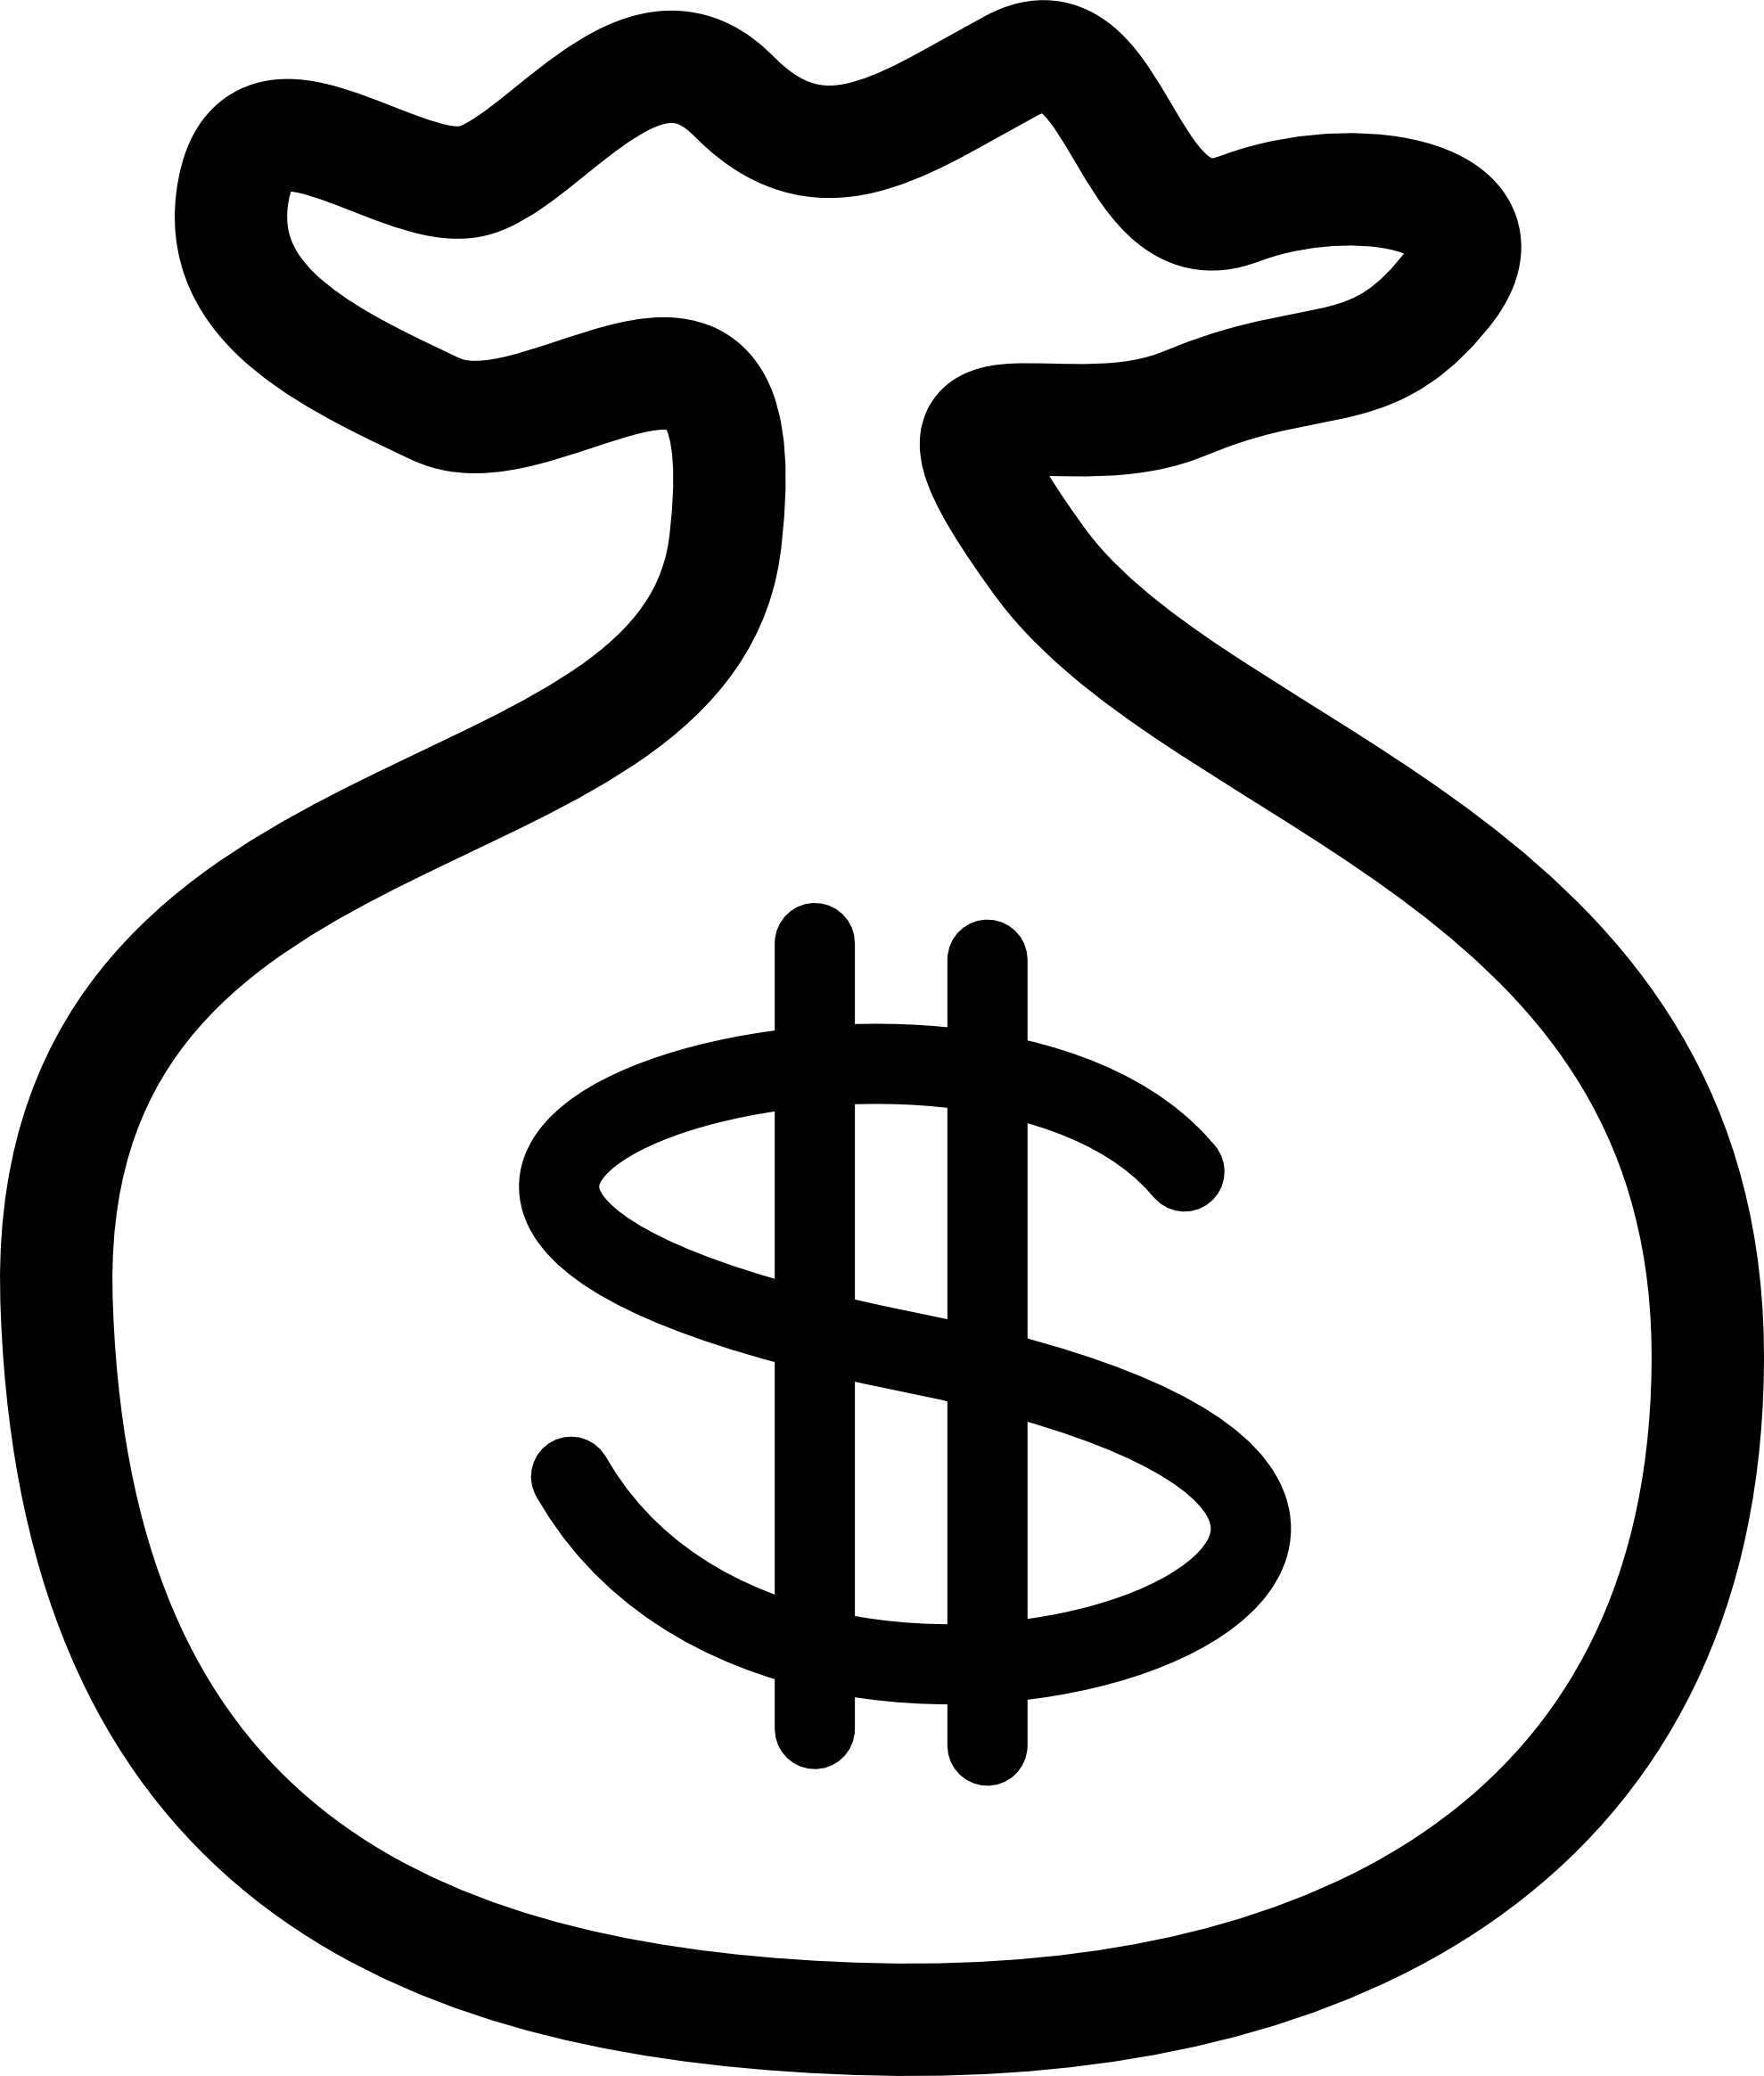 Dollar Sign Clipart Black And White | Clipart Panda - Free ... - Gangster Money Bag Drawings